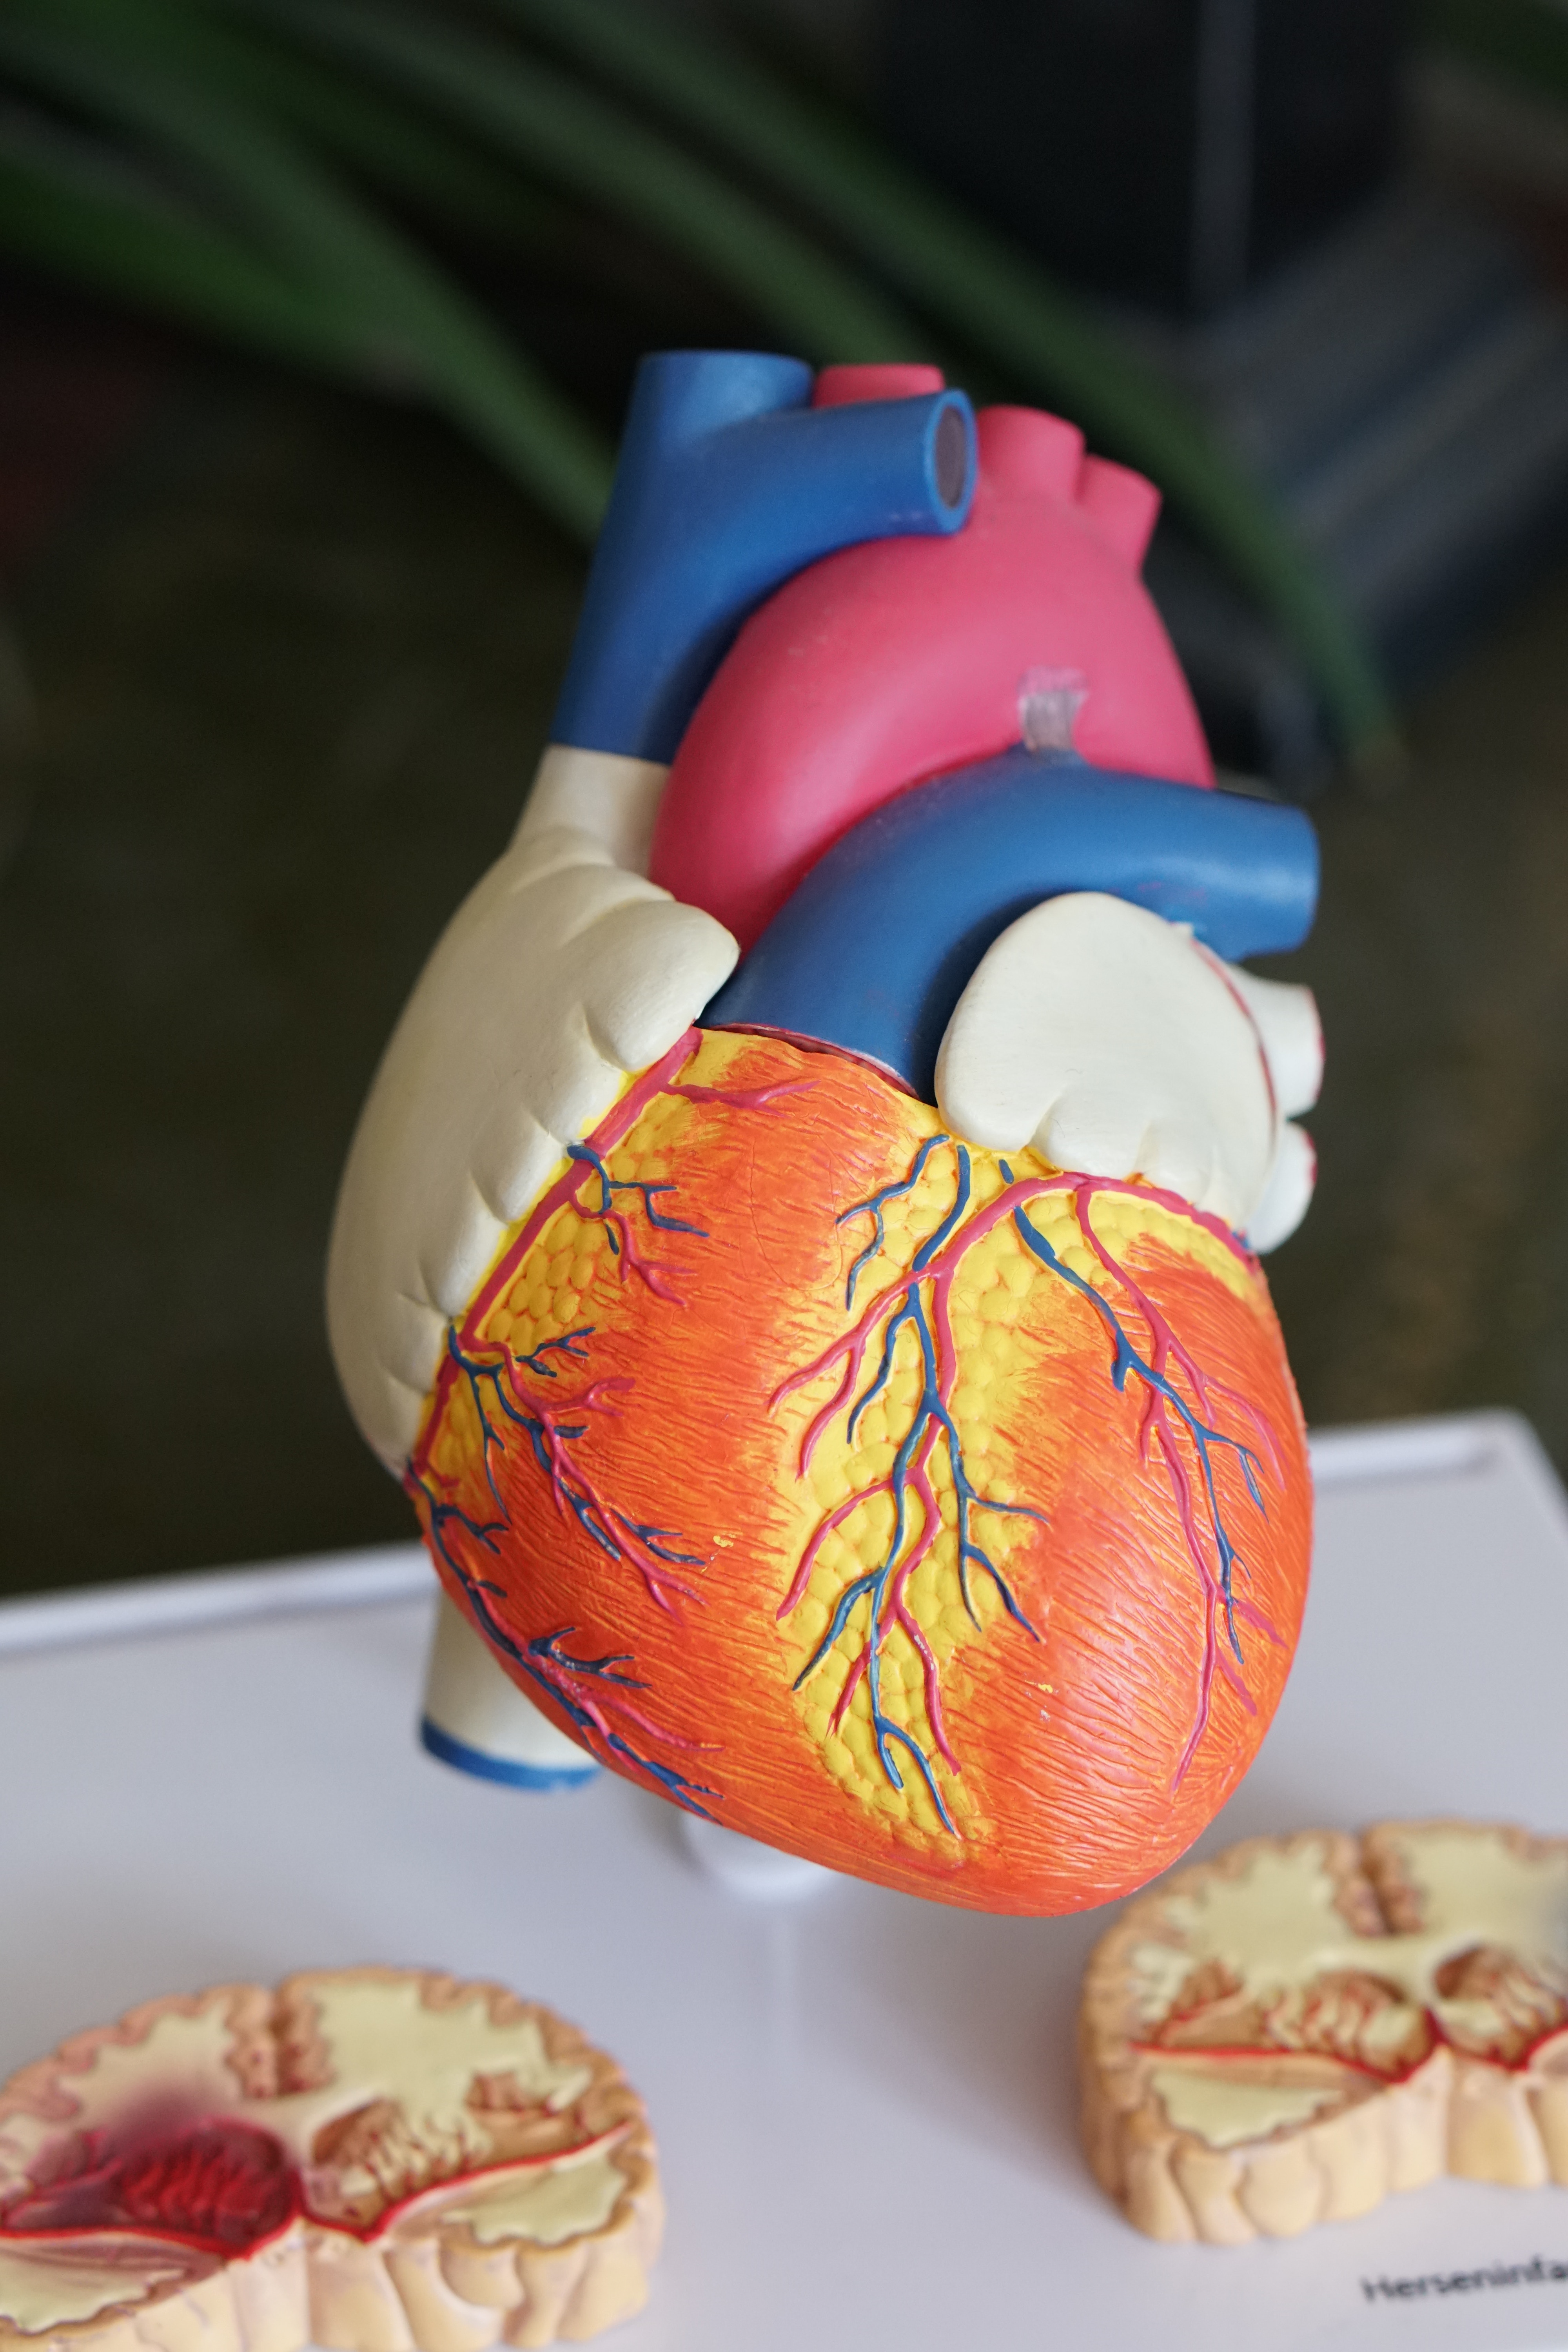 Sudden Cardiac Arrest and What You Should Know about it